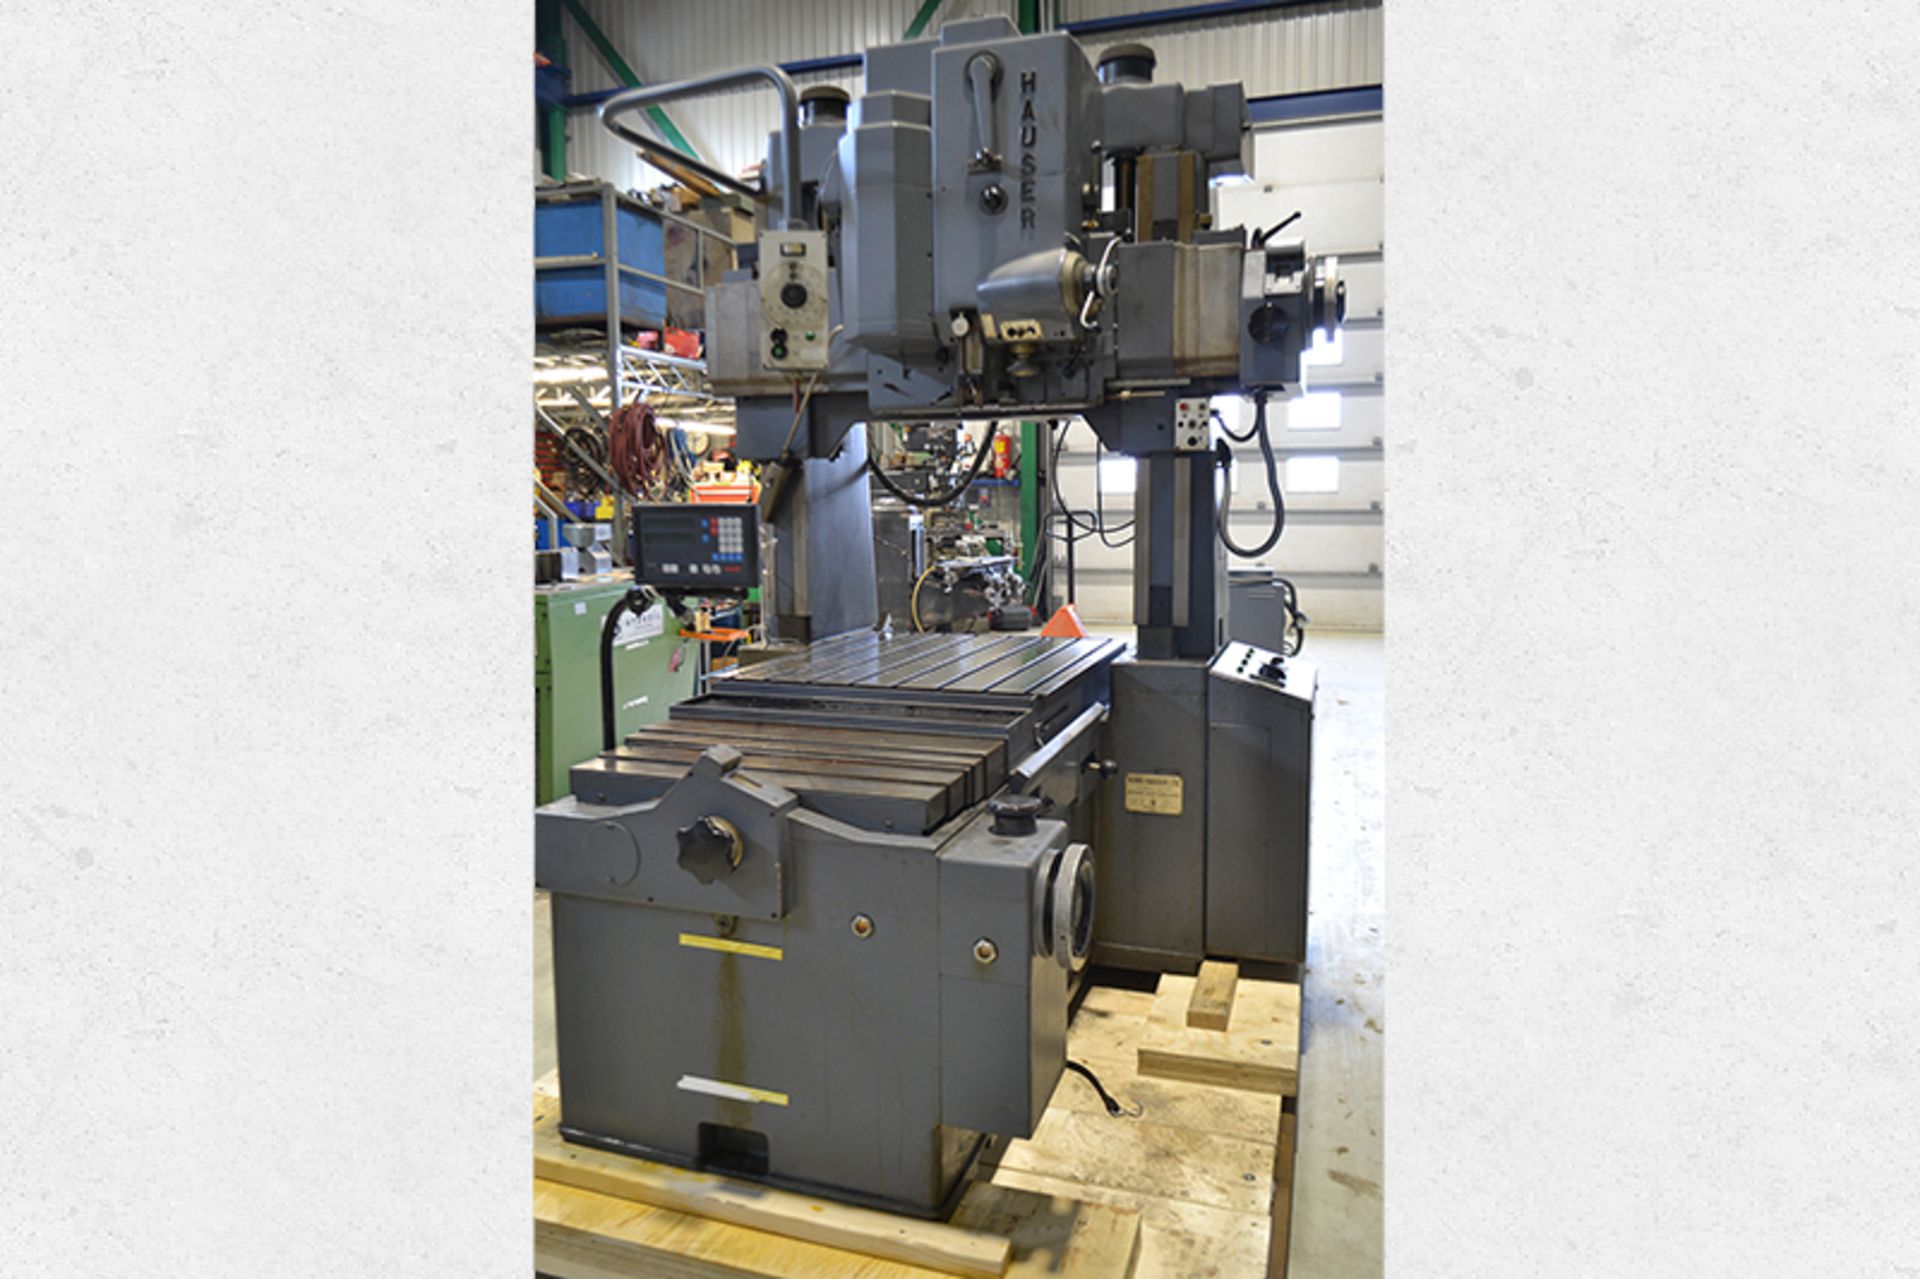 HAUSER JIG BORER MOD. M5, 35" X 30" TABLE, W/ (1) 19-1/2" ROTARY TABLE, 12" TILTING ROTARY TABLE,